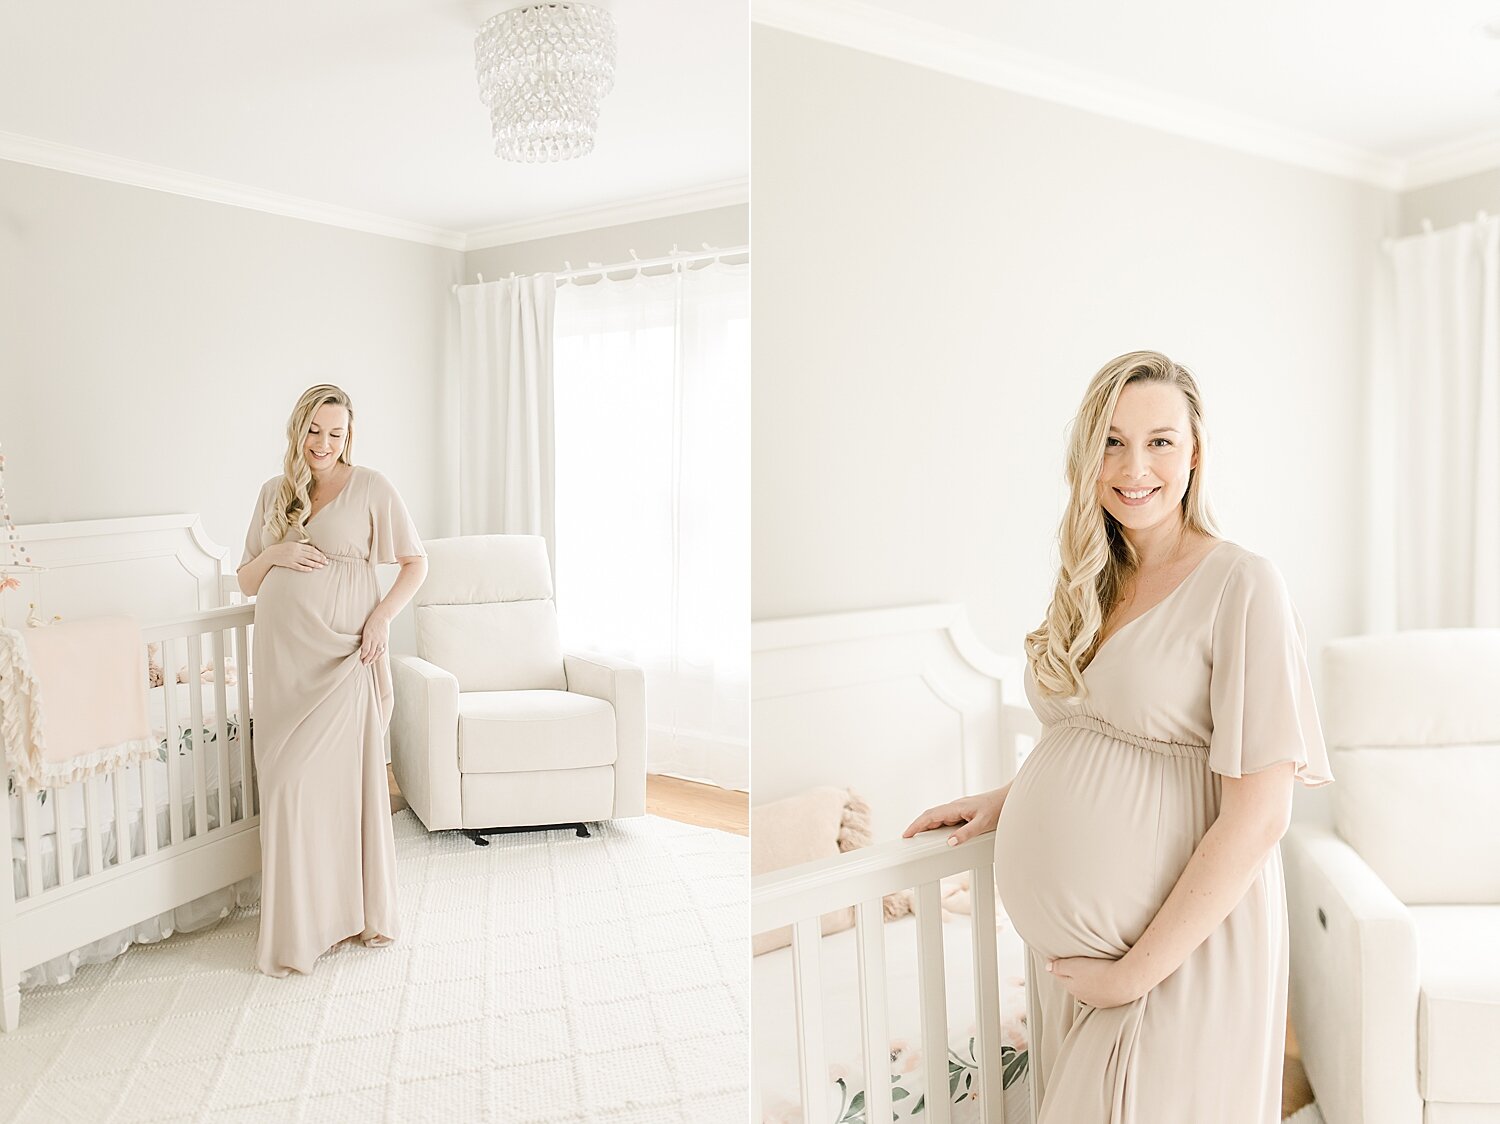 Lifestyle photoshoot for pregnancy in baby girl's nursery. Photo by Kristin Wood Photography.